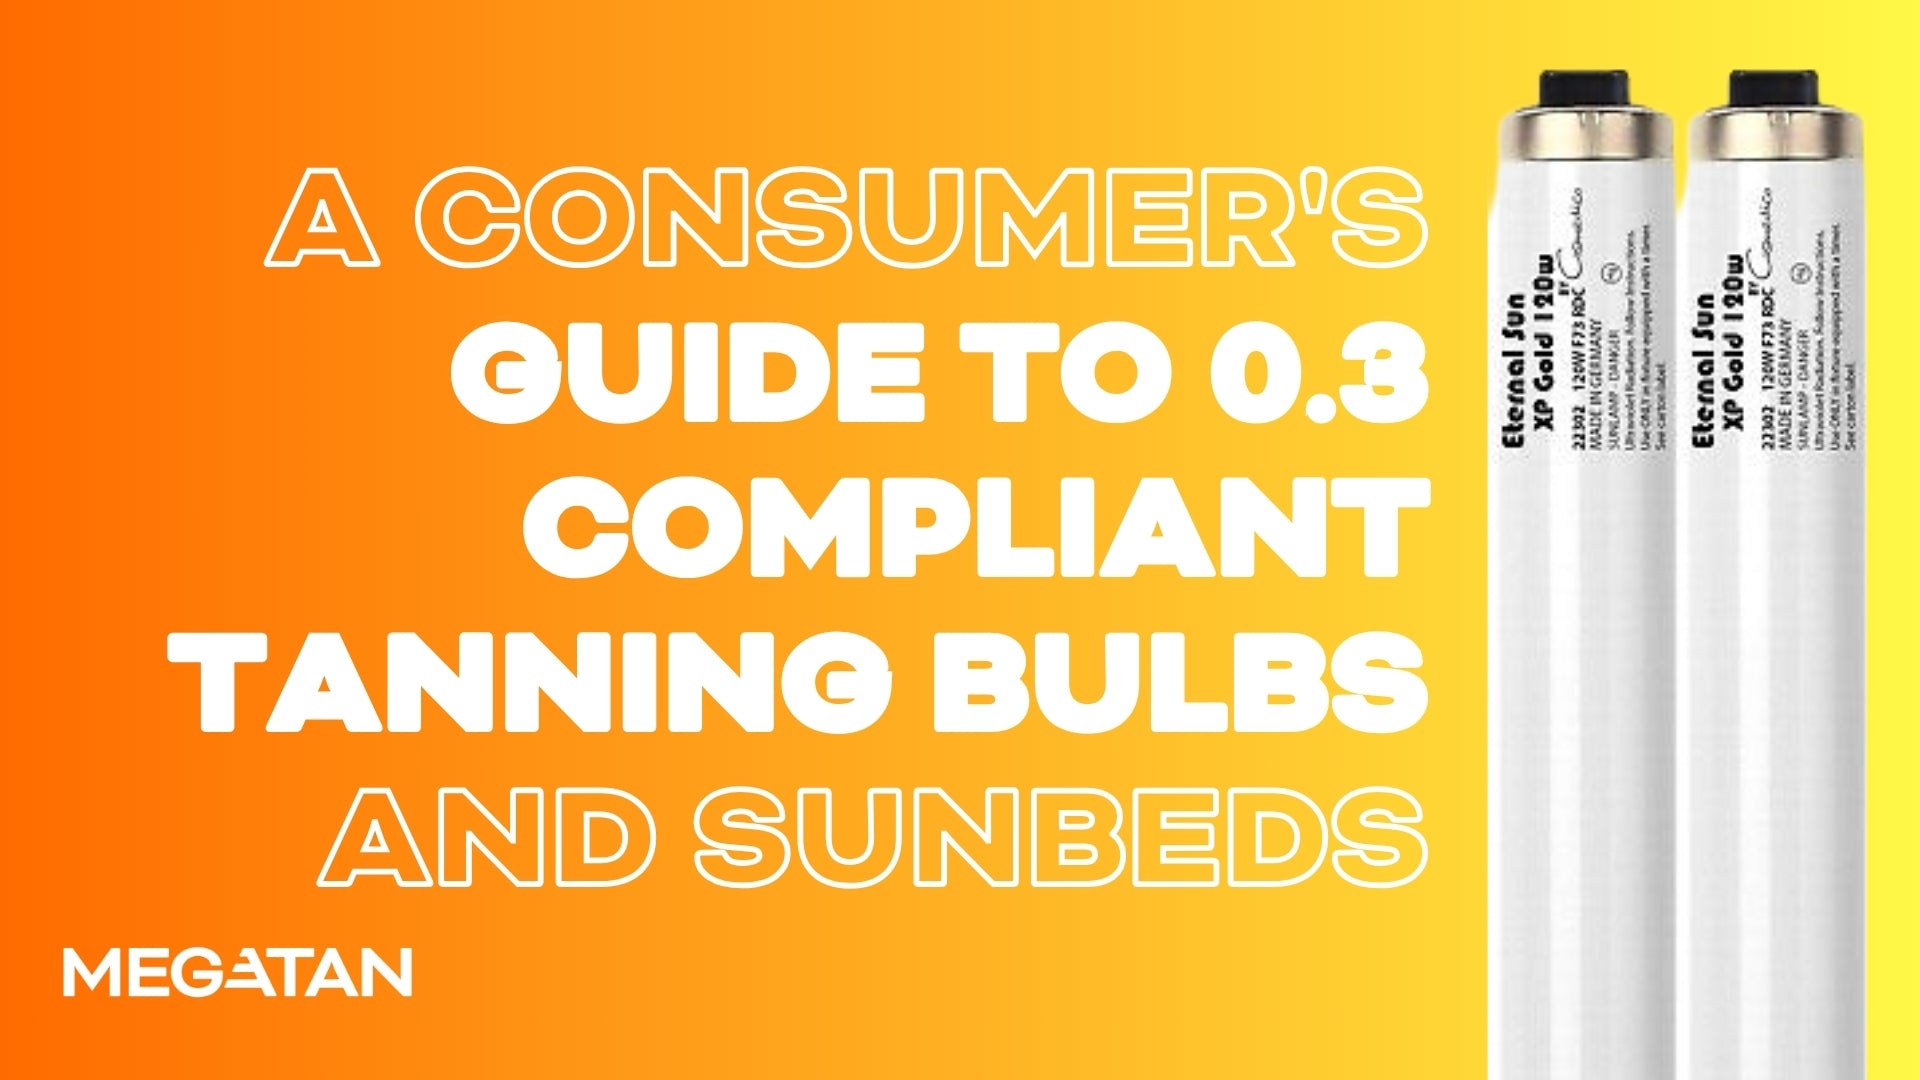 A Consumer's Guide to 0.3 Compliant Tanning Bulbs and Sunbeds